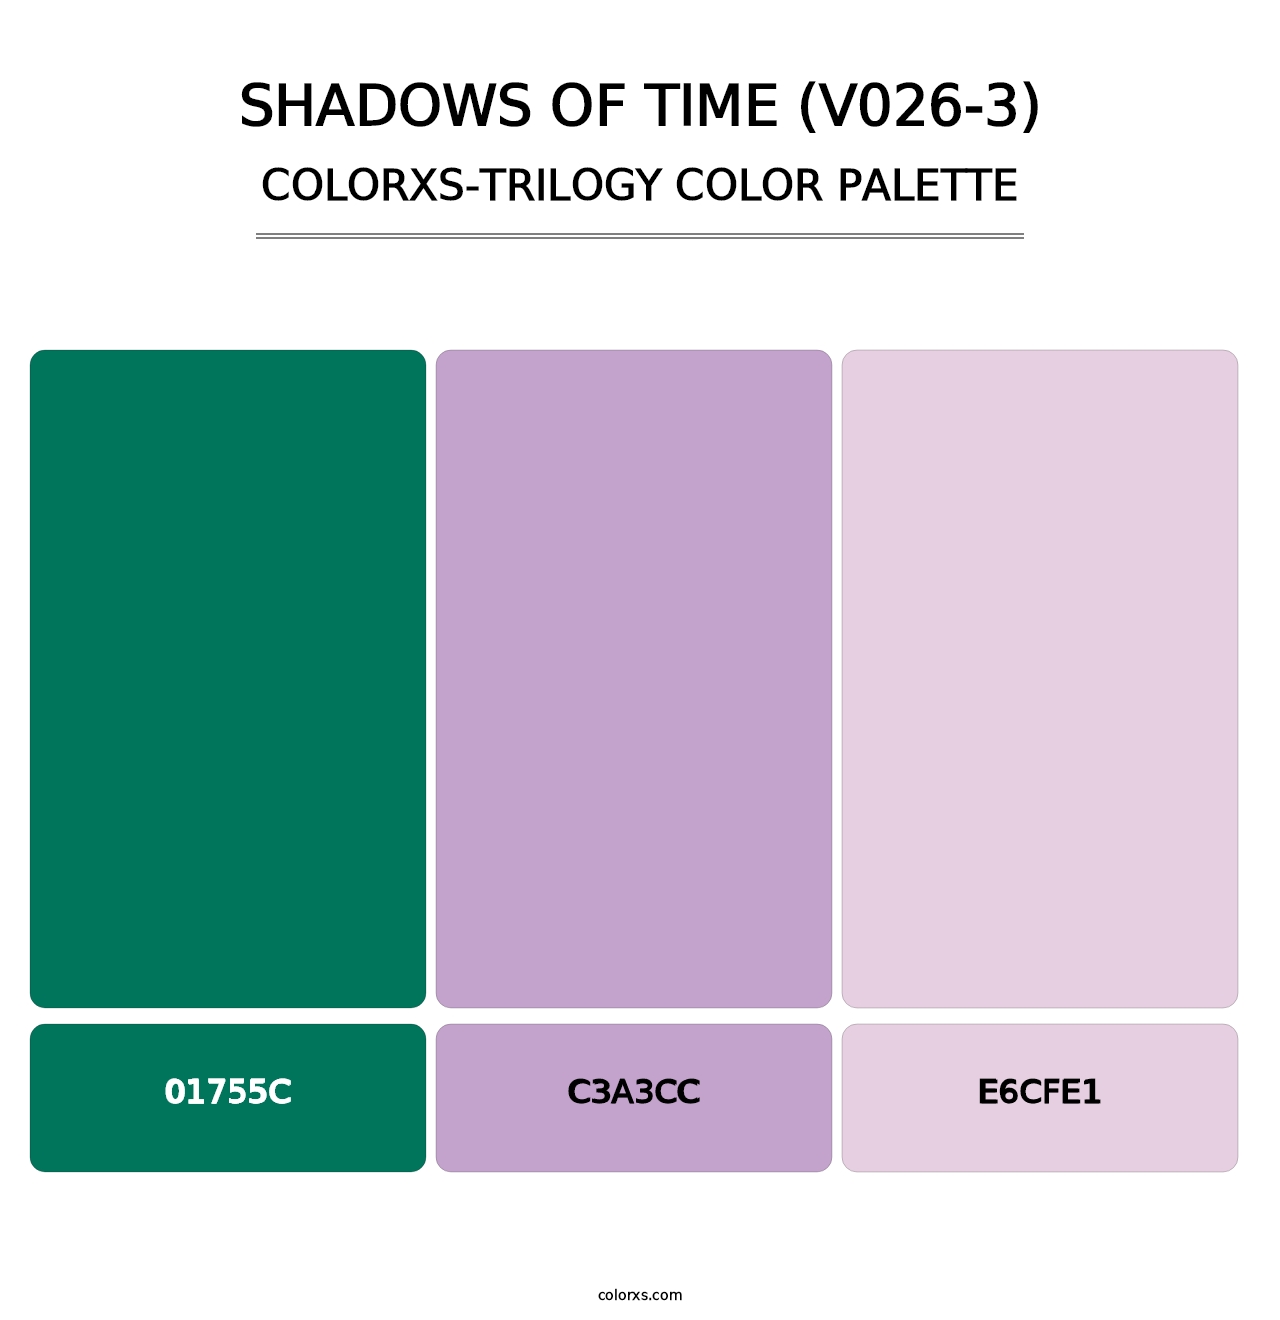 Shadows of Time (V026-3) - Colorxs Trilogy Palette